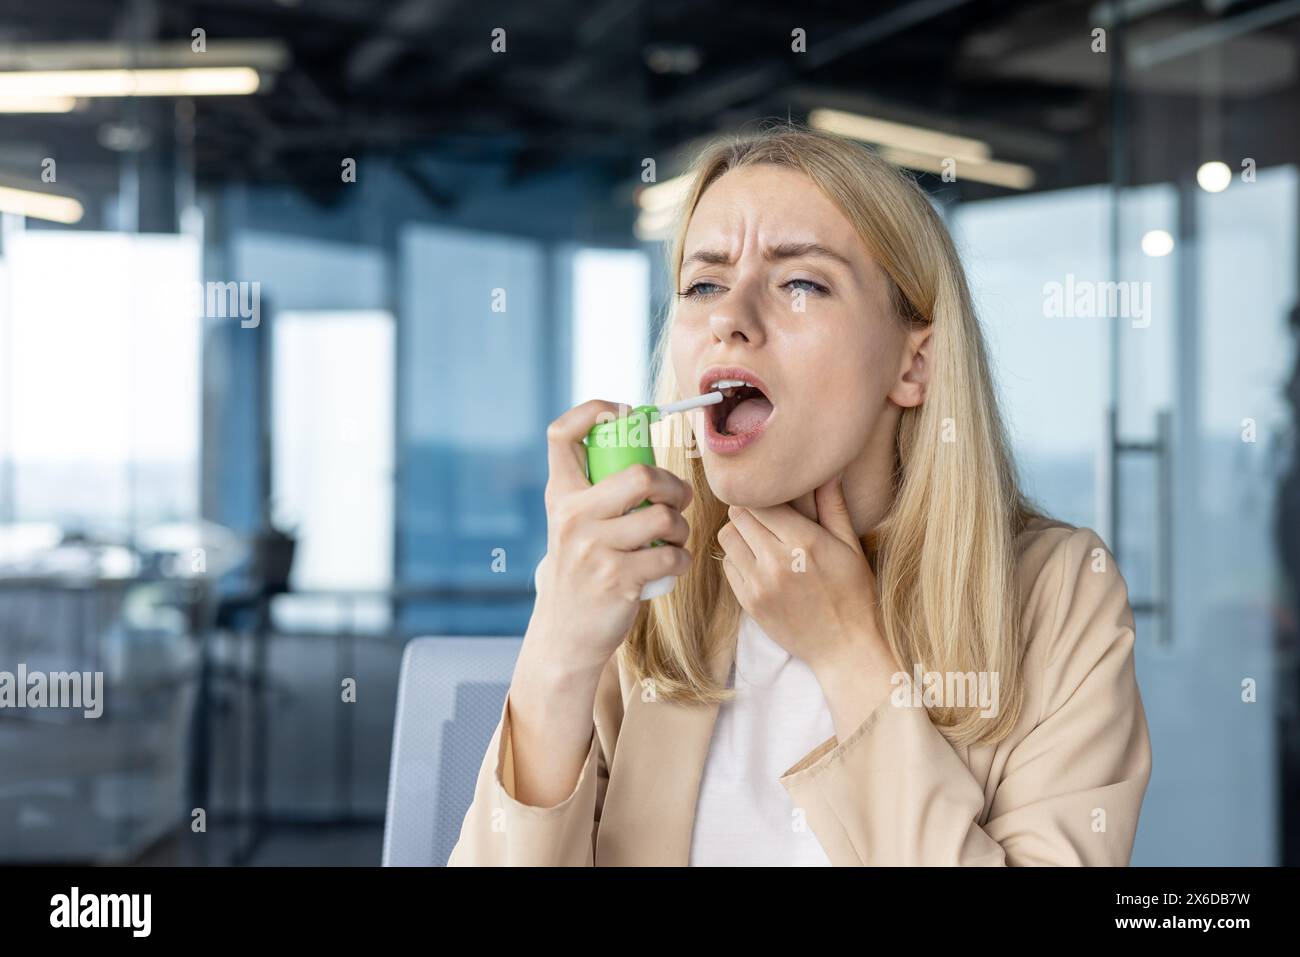 A woman in an office uses a throat spray for sore throat relief. She appears to be in discomfort while medicating in a modern workspace. Stock Photo